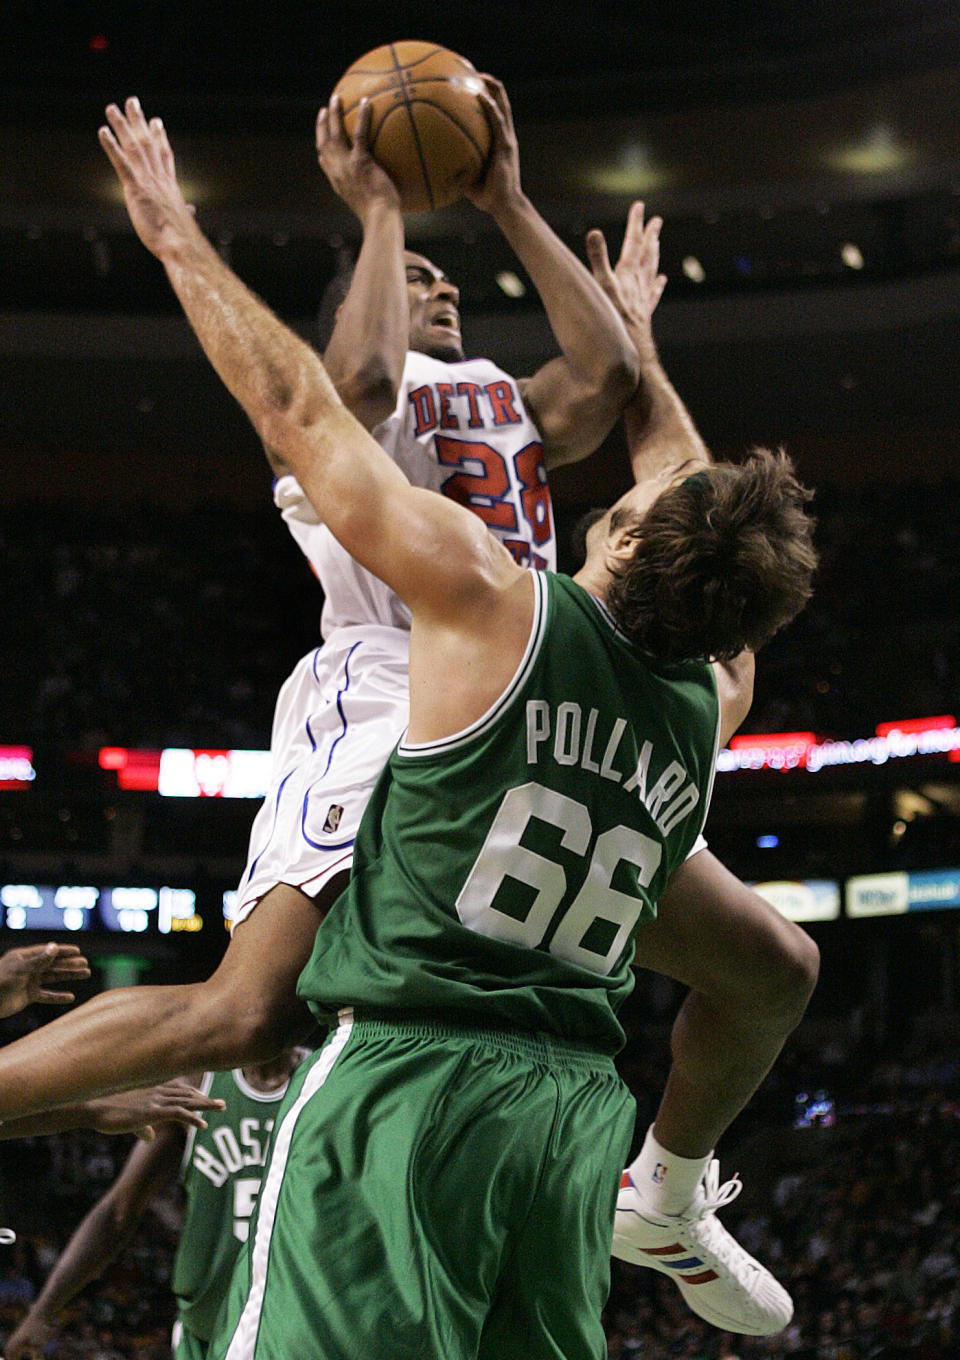 Boston Celtics’ Scot Pollard (66) attempts to draw a charge from <a class="link " href="https://sports.yahoo.com/nba/teams/detroit/" data-i13n="sec:content-canvas;subsec:anchor_text;elm:context_link" data-ylk="slk:Detroit Pistons;sec:content-canvas;subsec:anchor_text;elm:context_link;itc:0">Detroit Pistons</a>’ <a class="link " href="https://sports.yahoo.com/nba/players/4305/" data-i13n="sec:content-canvas;subsec:anchor_text;elm:context_link" data-ylk="slk:Arron Afflalo;sec:content-canvas;subsec:anchor_text;elm:context_link;itc:0">Arron Afflalo</a> (28), but instead is called for a foul during the first half of an NBA basketball game in Boston on Wednesday, Dec. 19, 2007. (AP Photo/Elise Amendola)